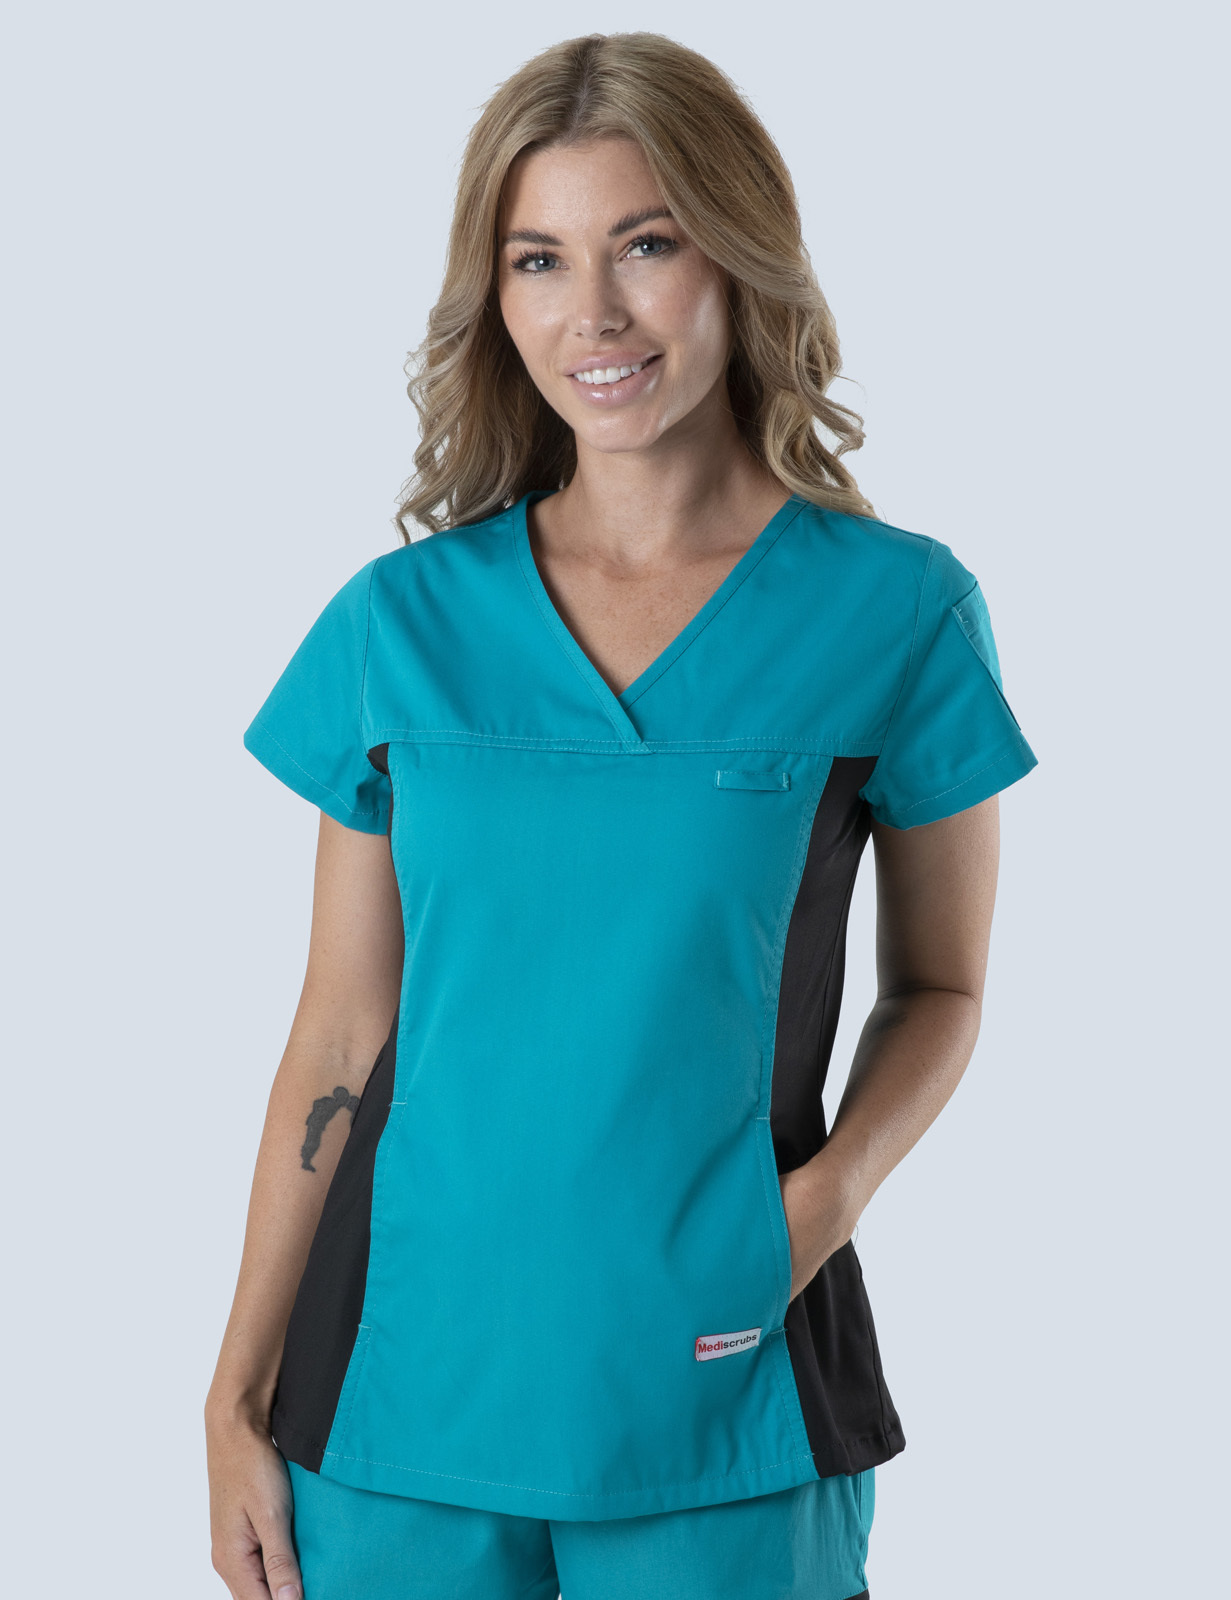 Women's Fit Solid Scrub Top With Spandex Panel - Teal - 4X large